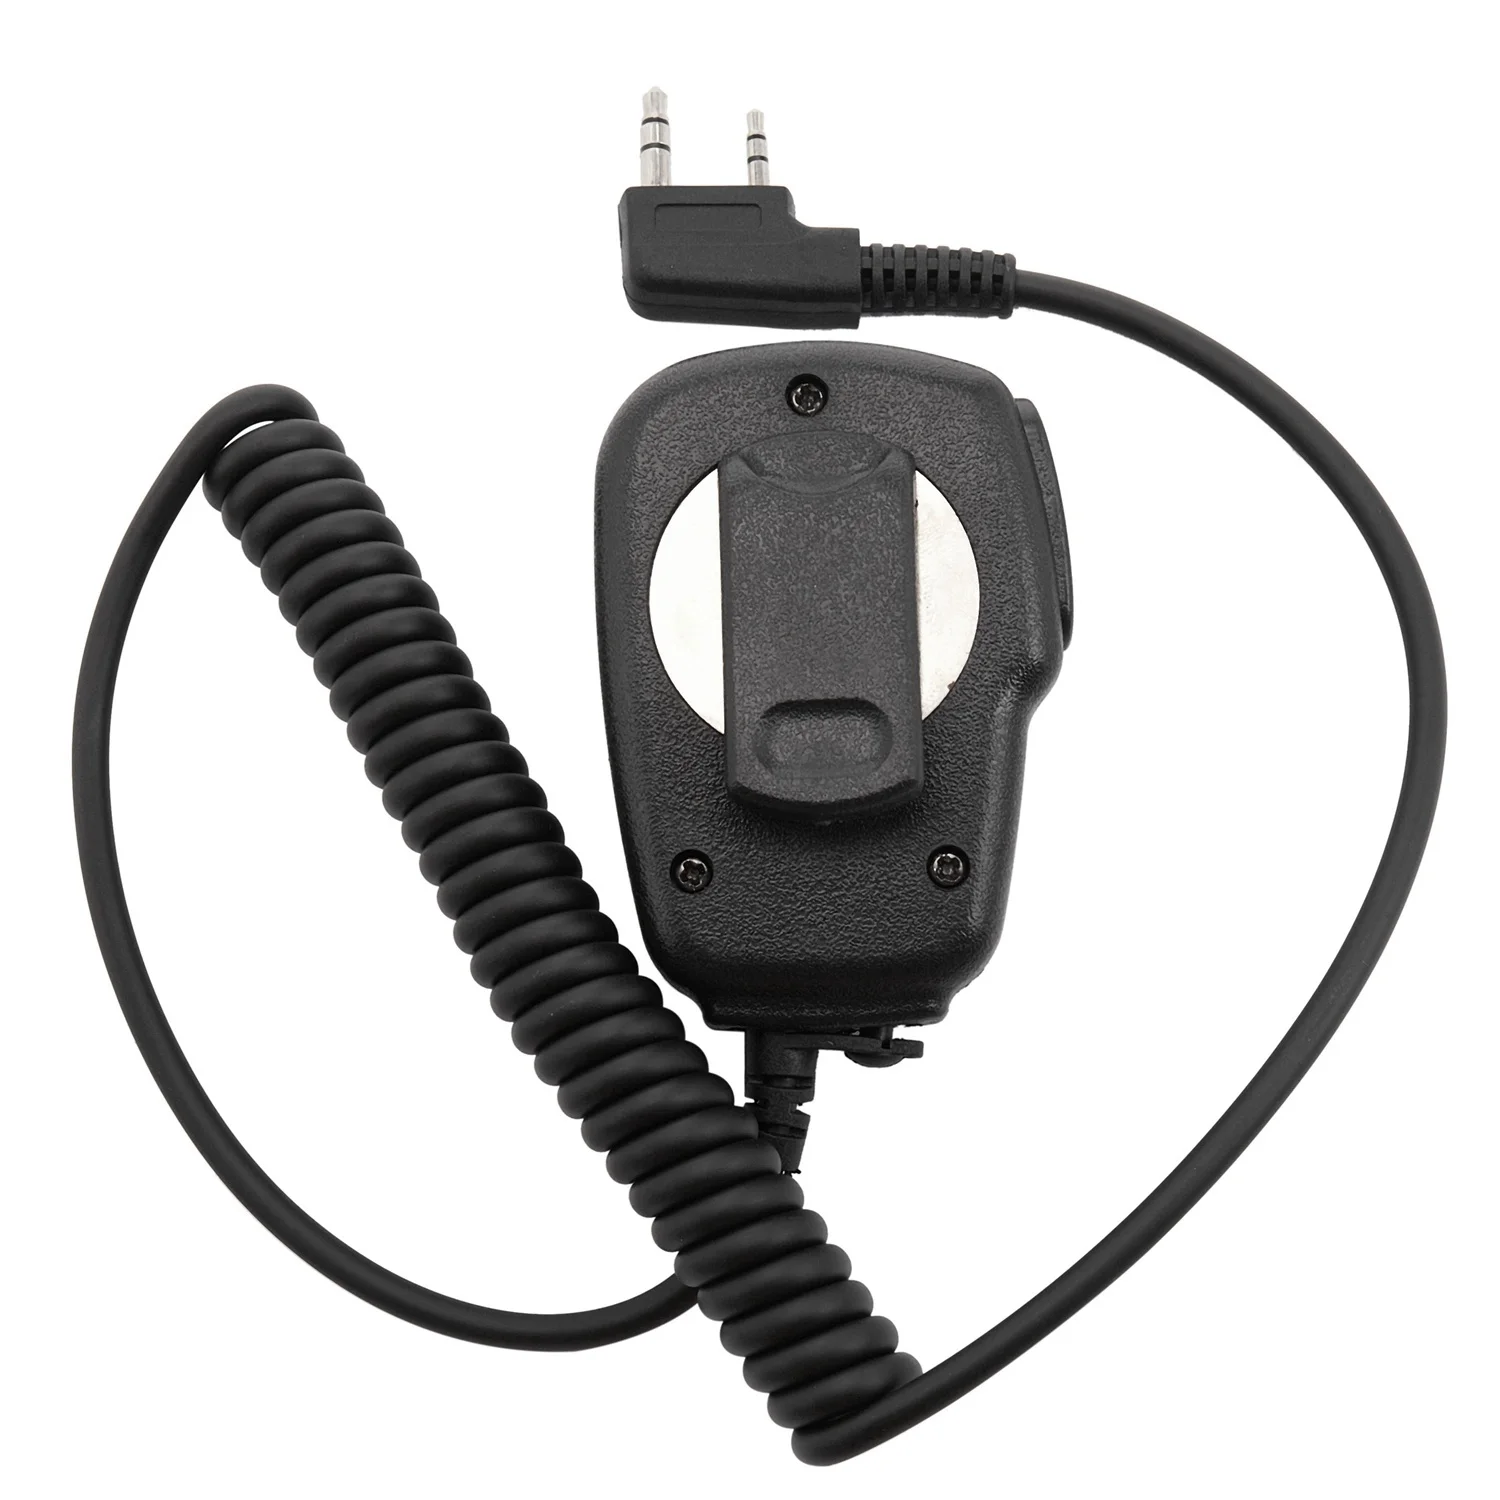 

2 Pin Mini PTT Speaker MIC Walkie Talkie Accessories For UV5R 888S For For Two Way Radio C9021A